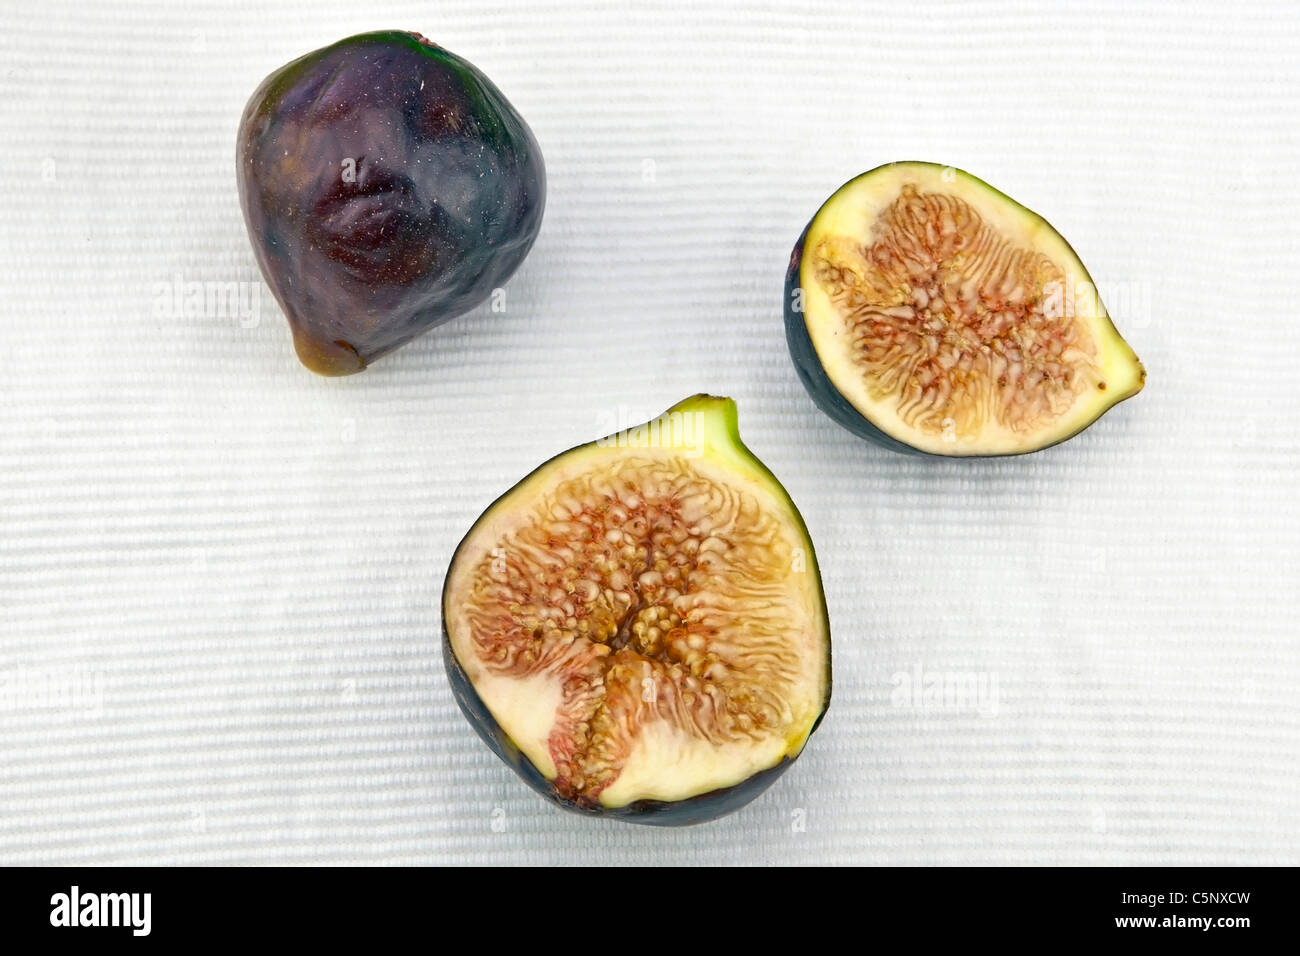 a whole and two halves of fresh figs Stock Photo